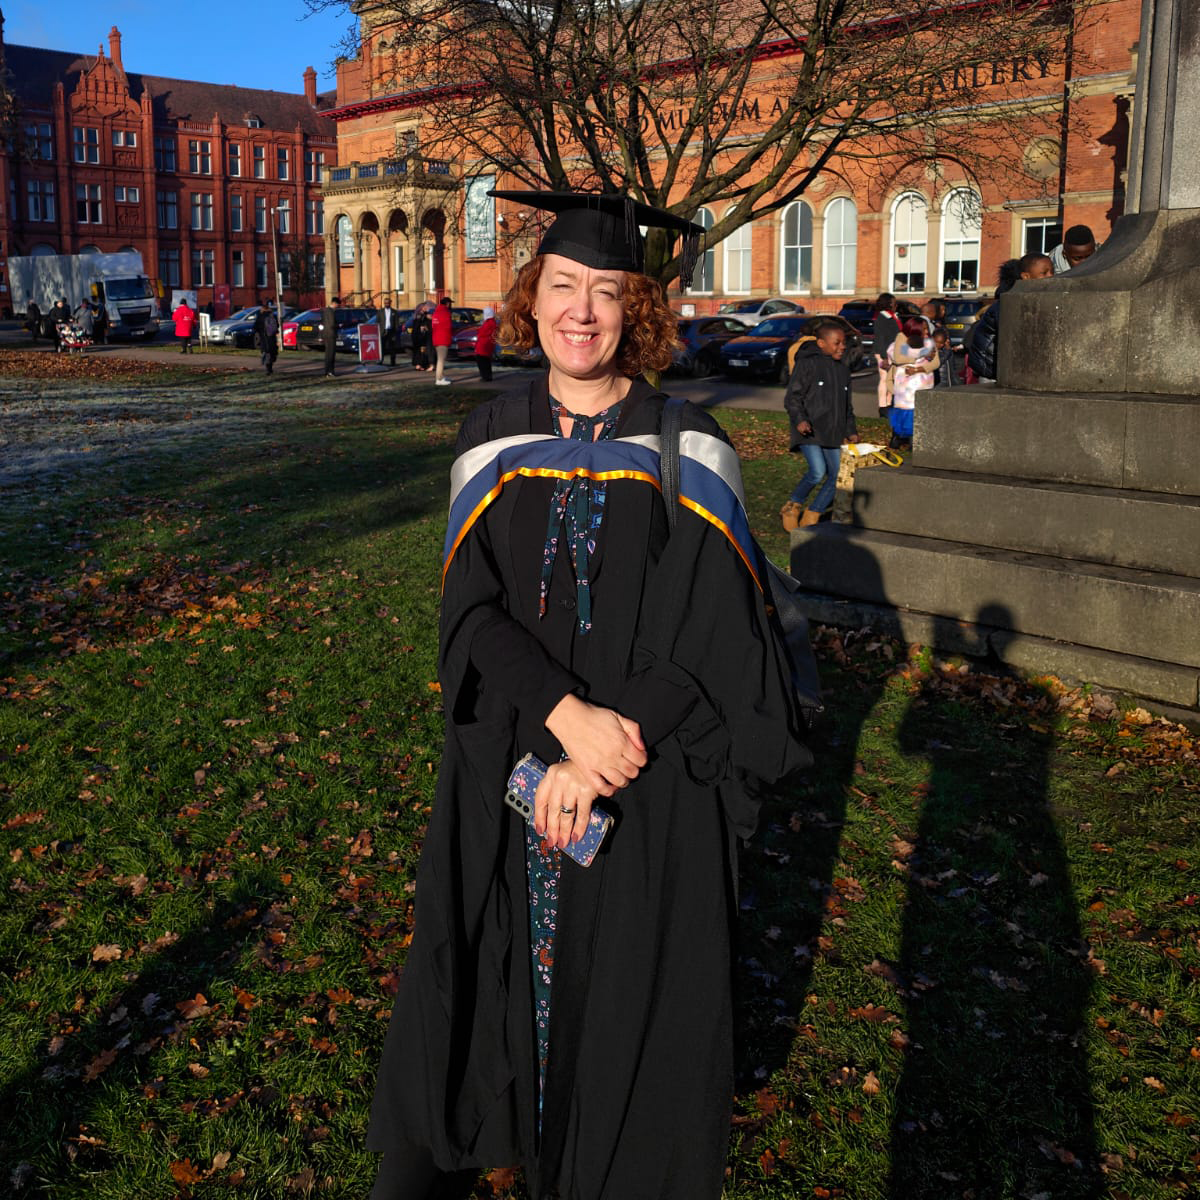 Erica Boardman in a graduation cap and gown outside Salford Museum